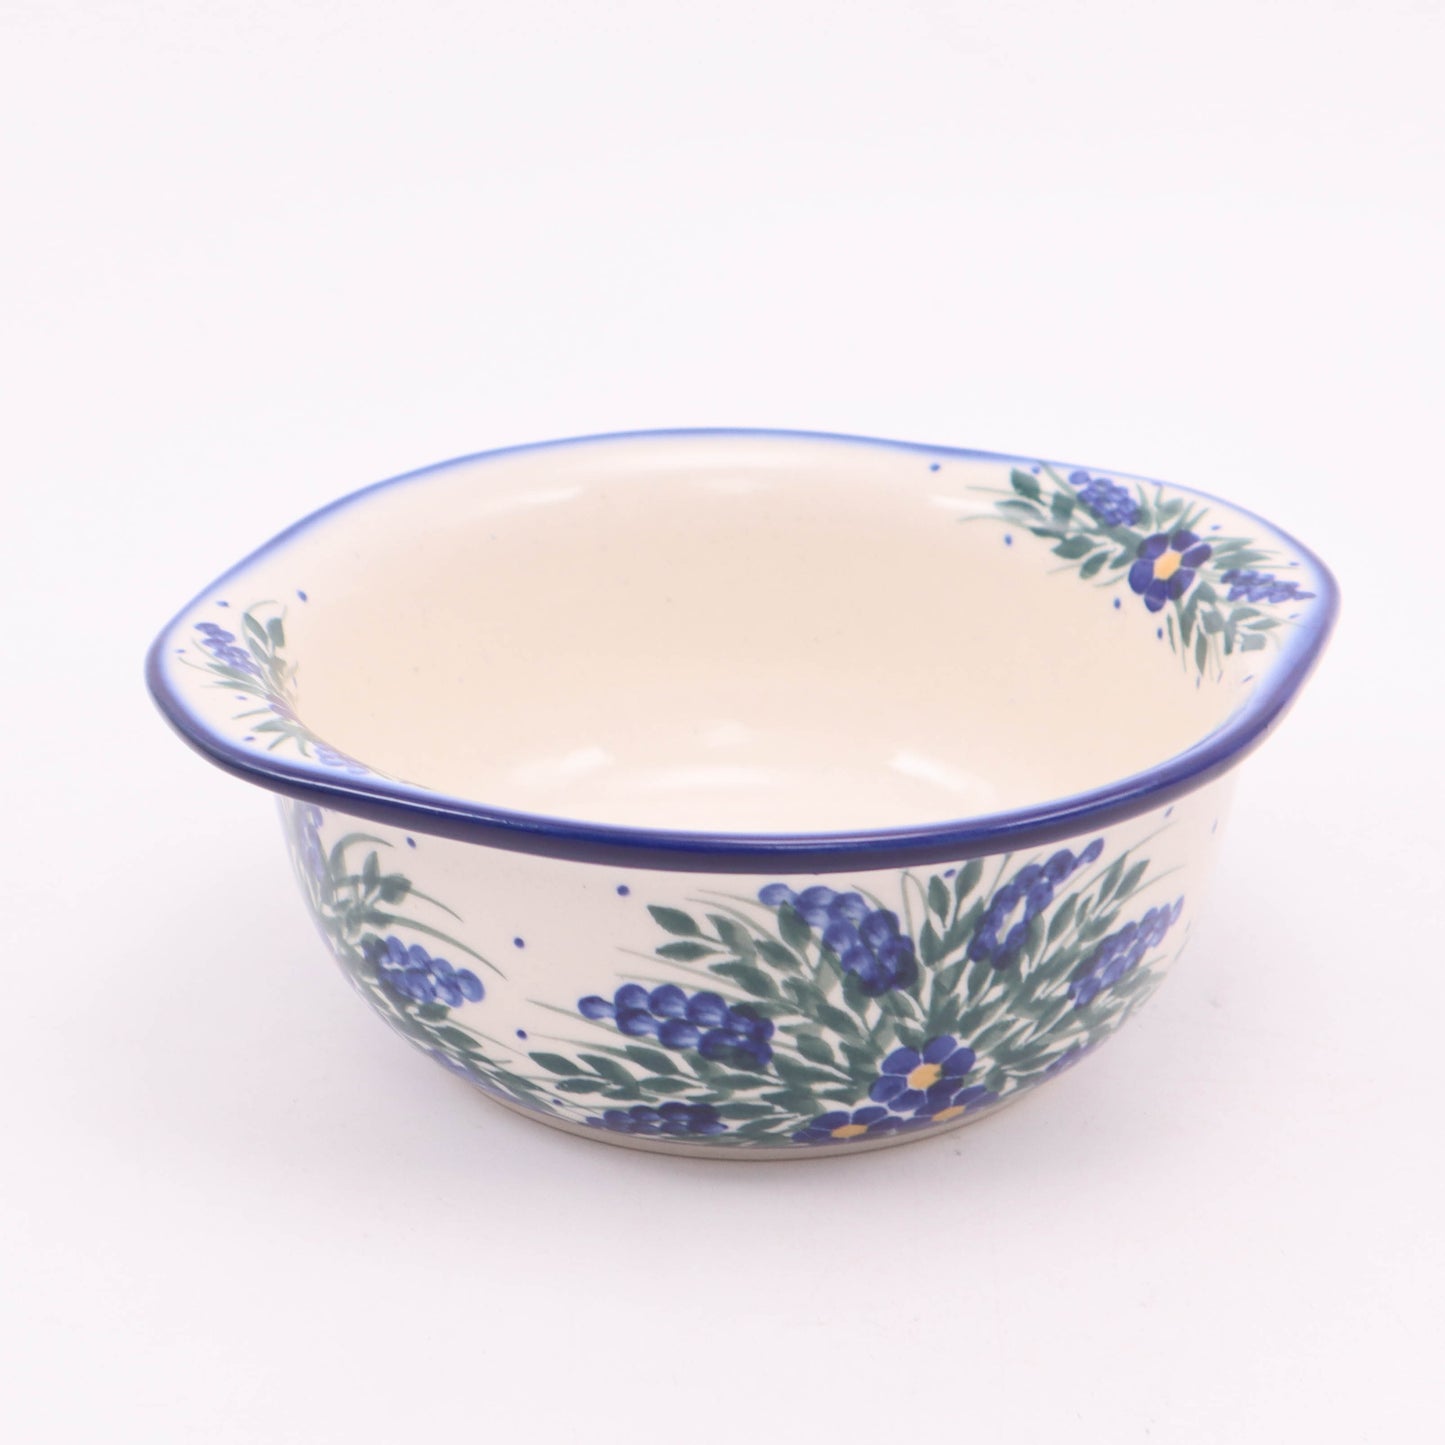 6.5" Soup Bowl with Handles. Pattern: Chelsea